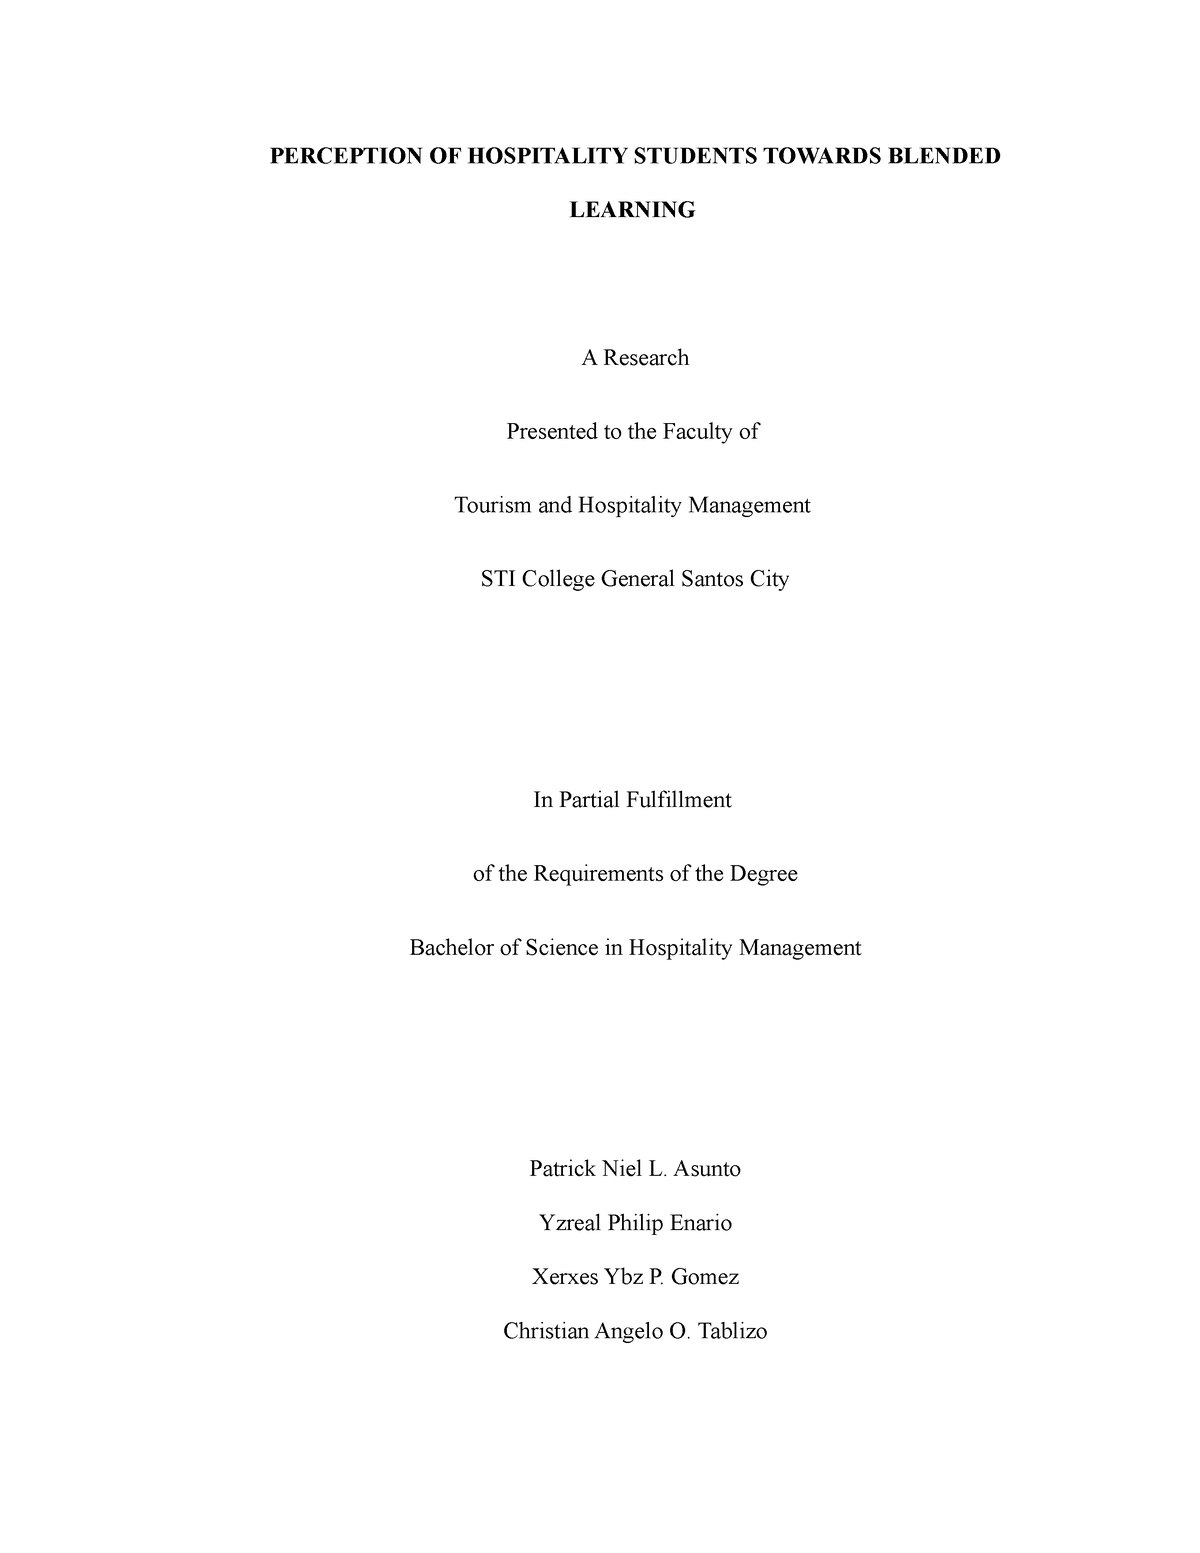 thesis on hospitality management